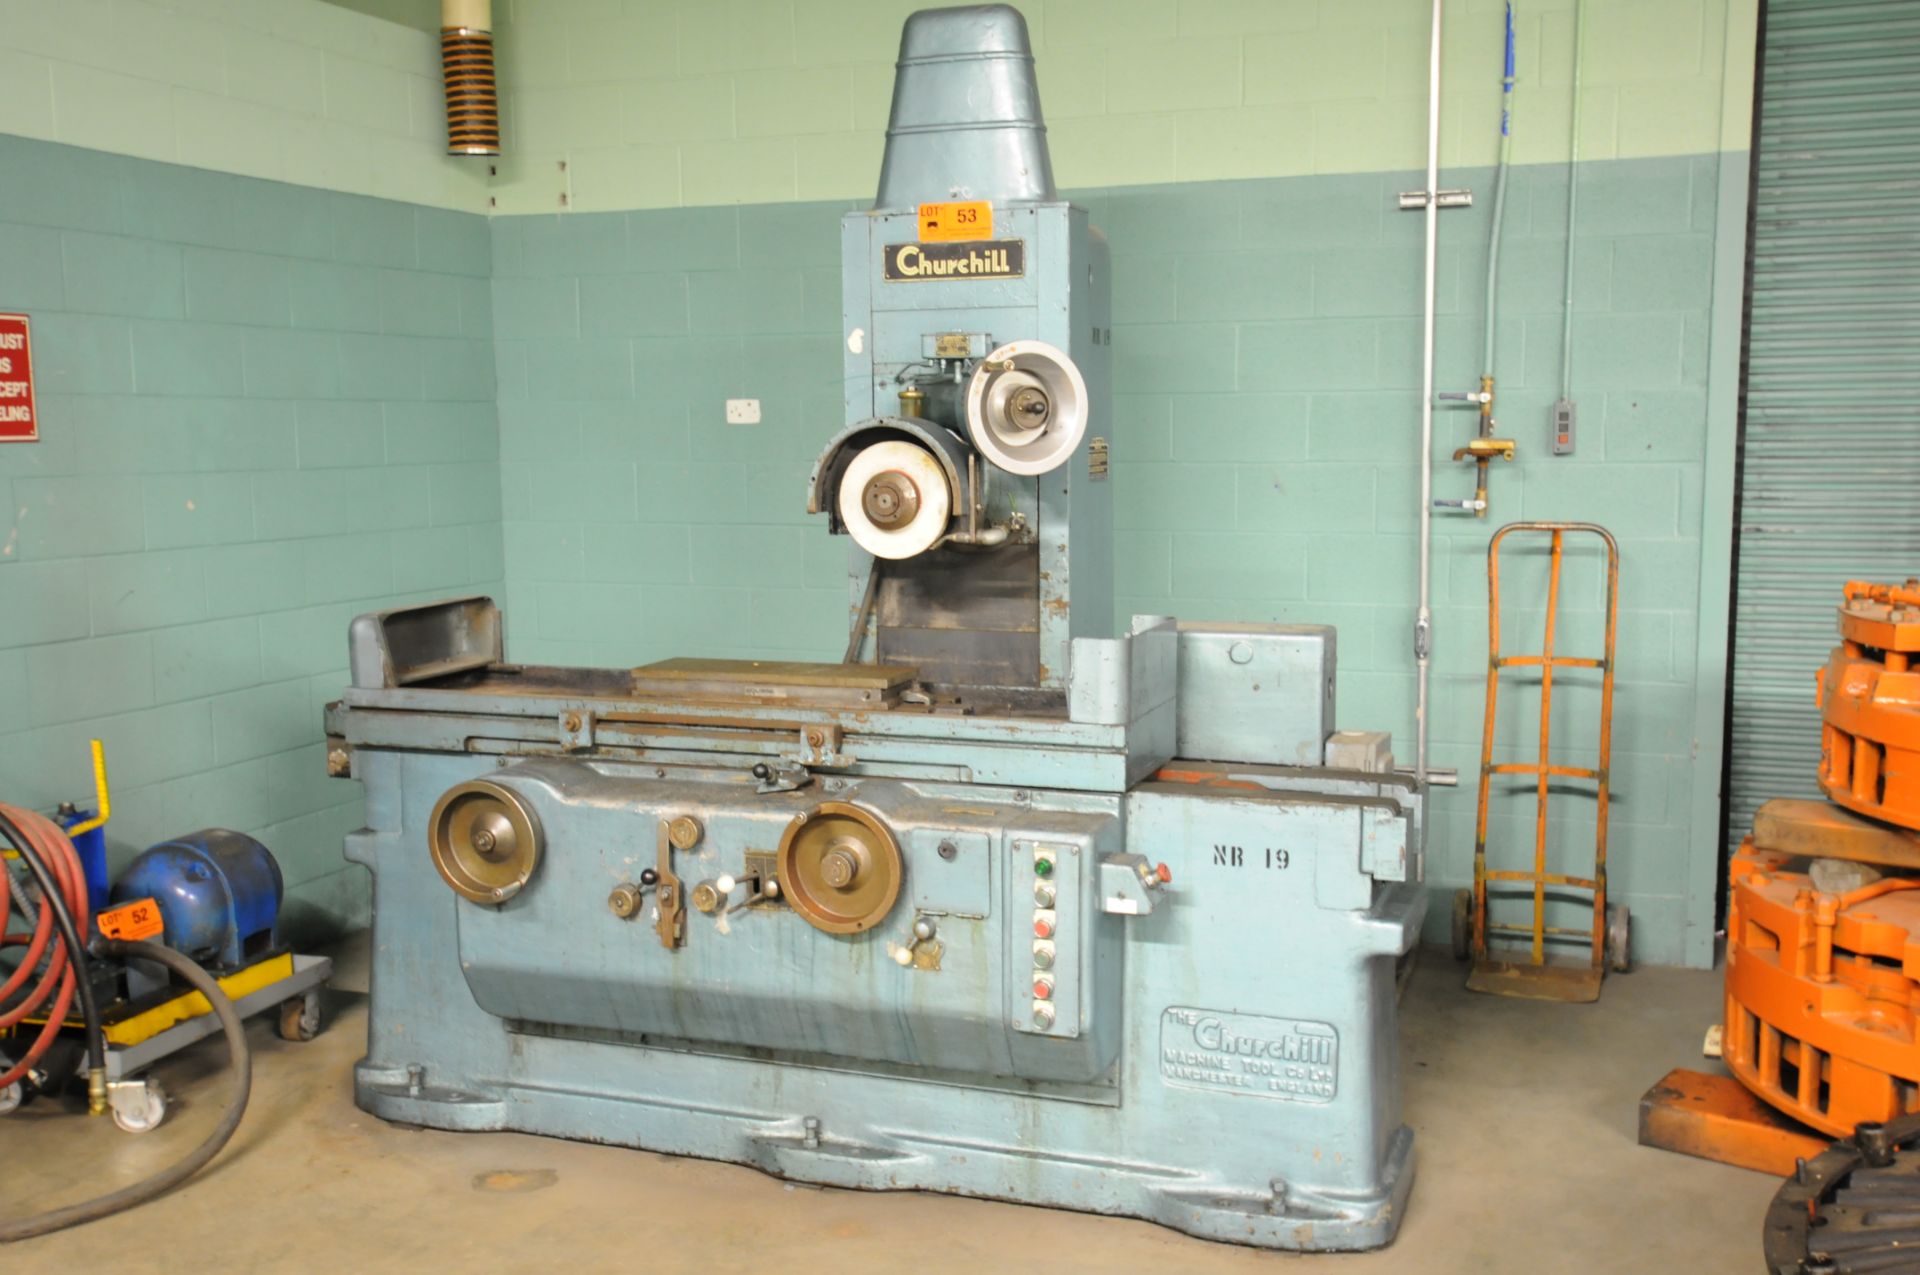 CHURCHILL O.S.B HYDRAULIC SURFACE GRINDER WITH 24" X 8" MAGNETIC CHUCK, 12" GRINDING WHEEL,